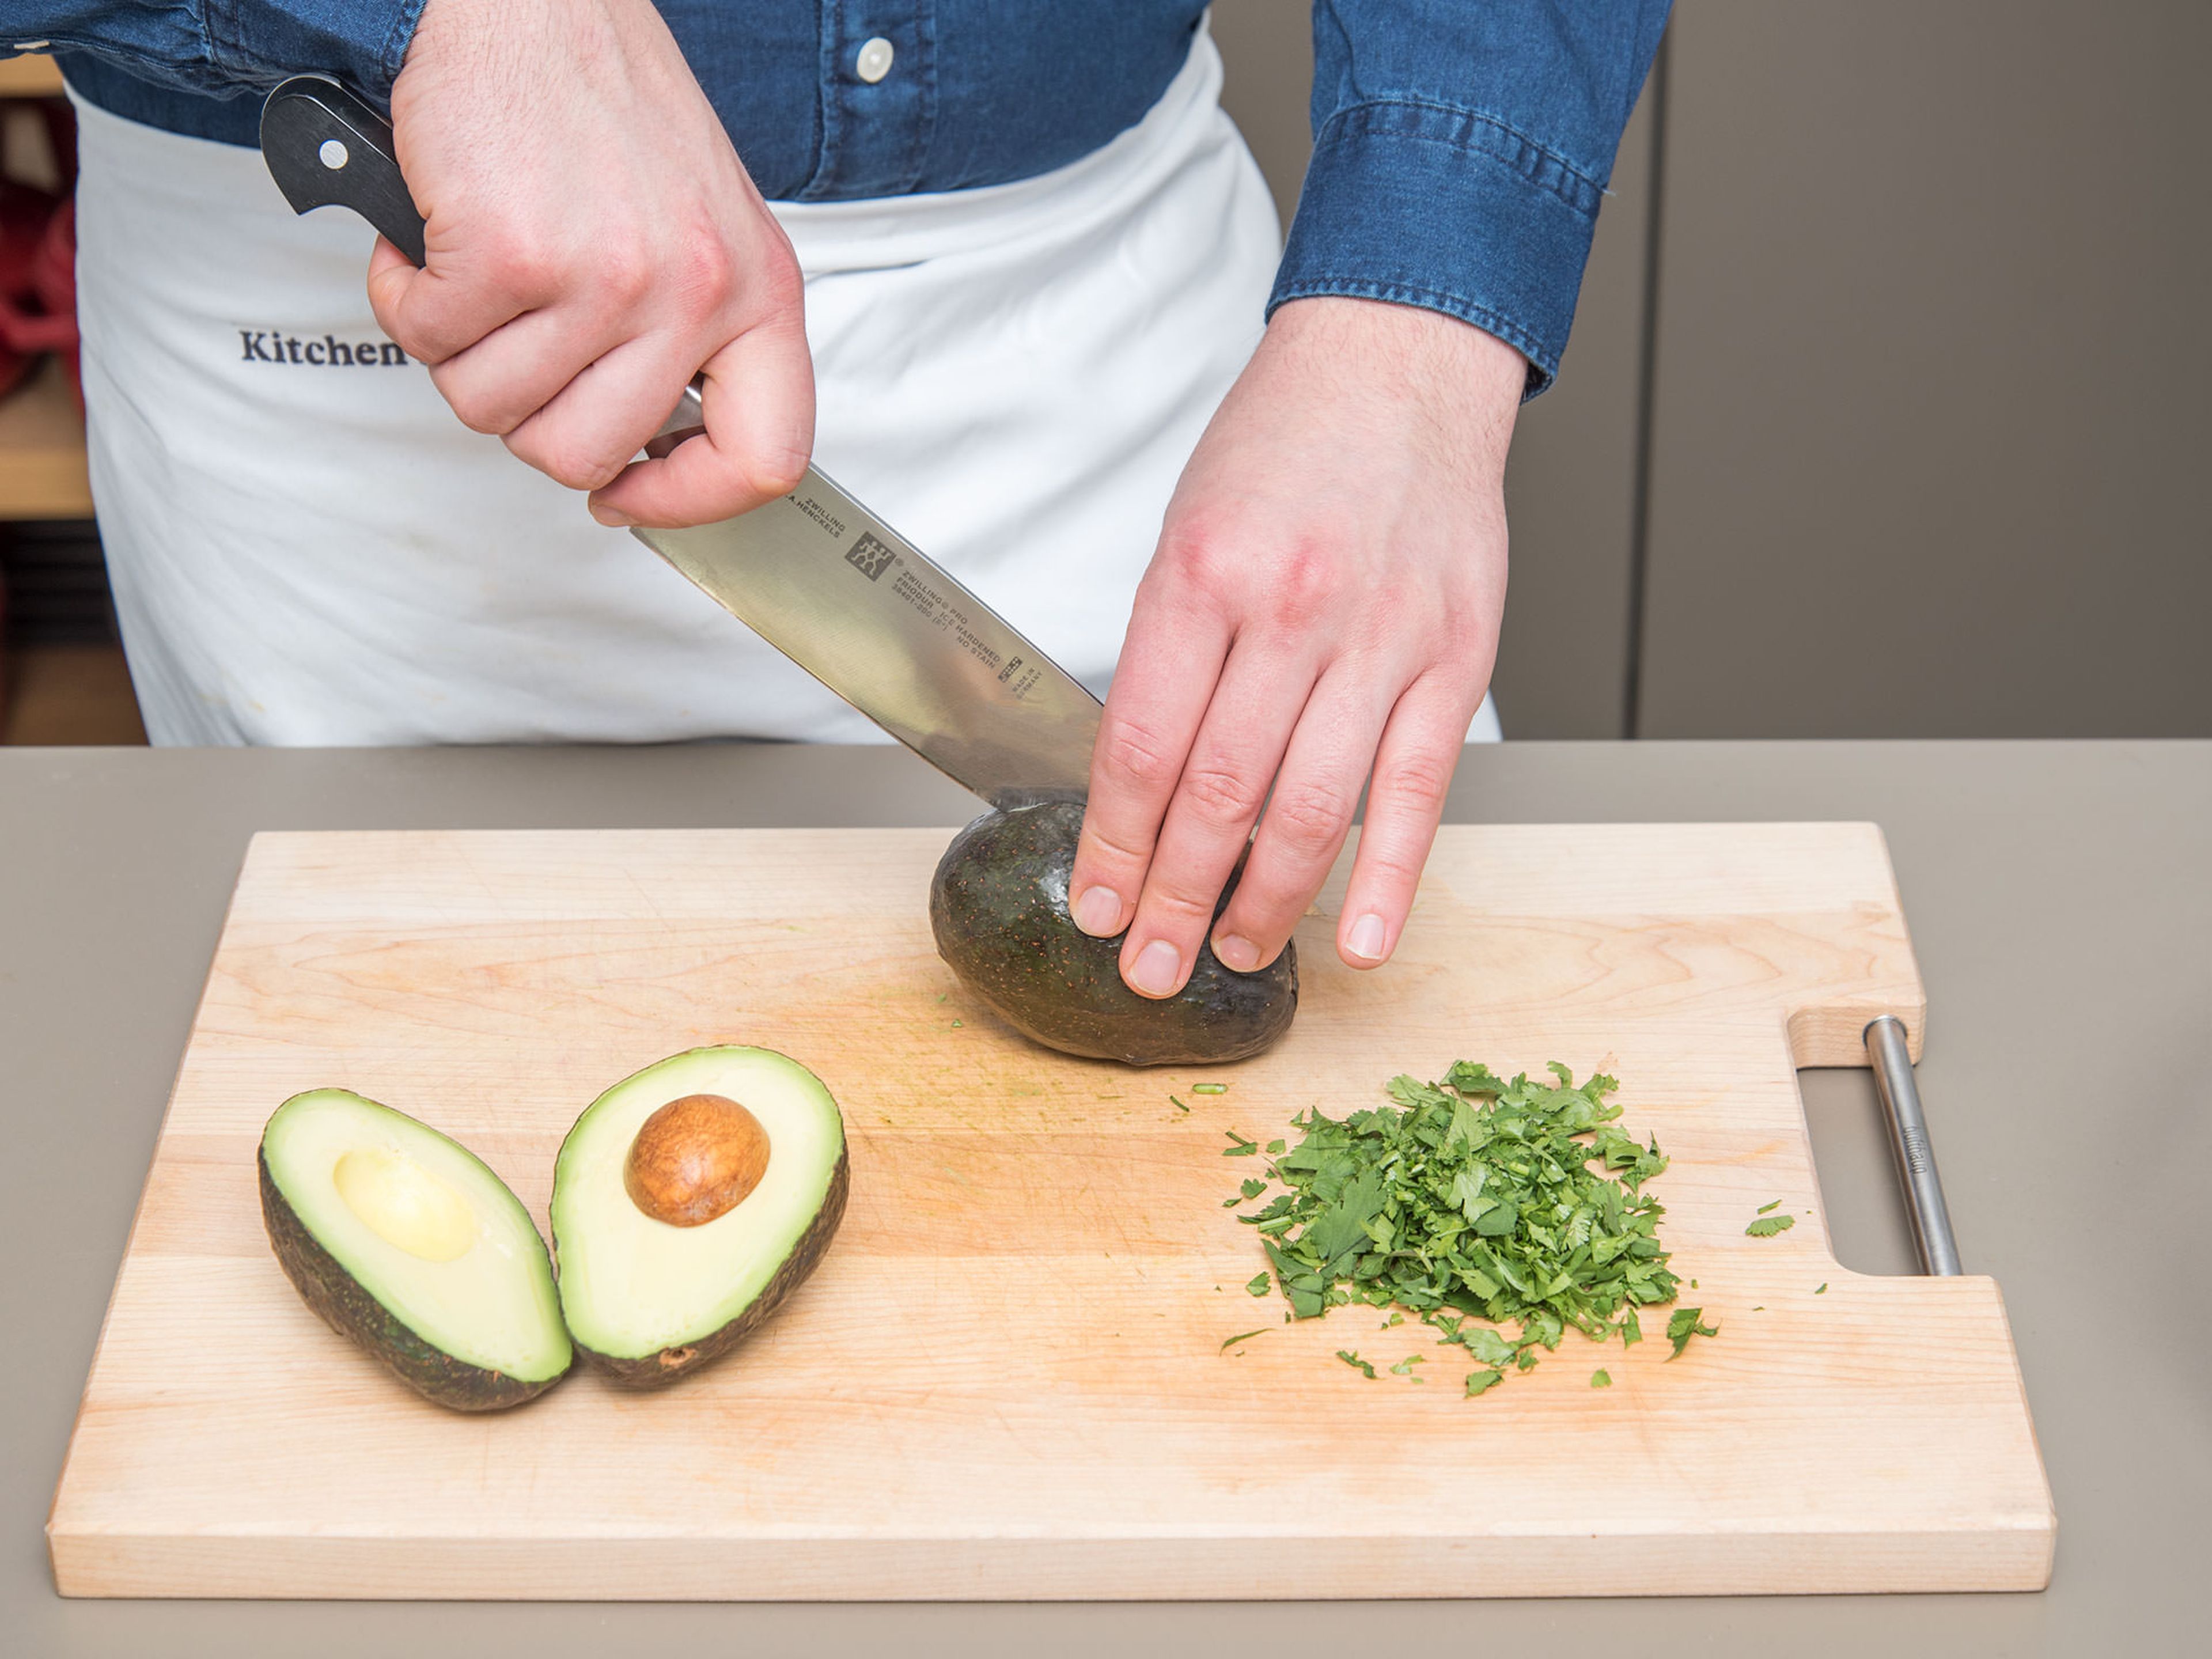 Meanwhile halve and peel avocados, remove the pit and dice the avocado flesh. Wash and finely chop cilantro.